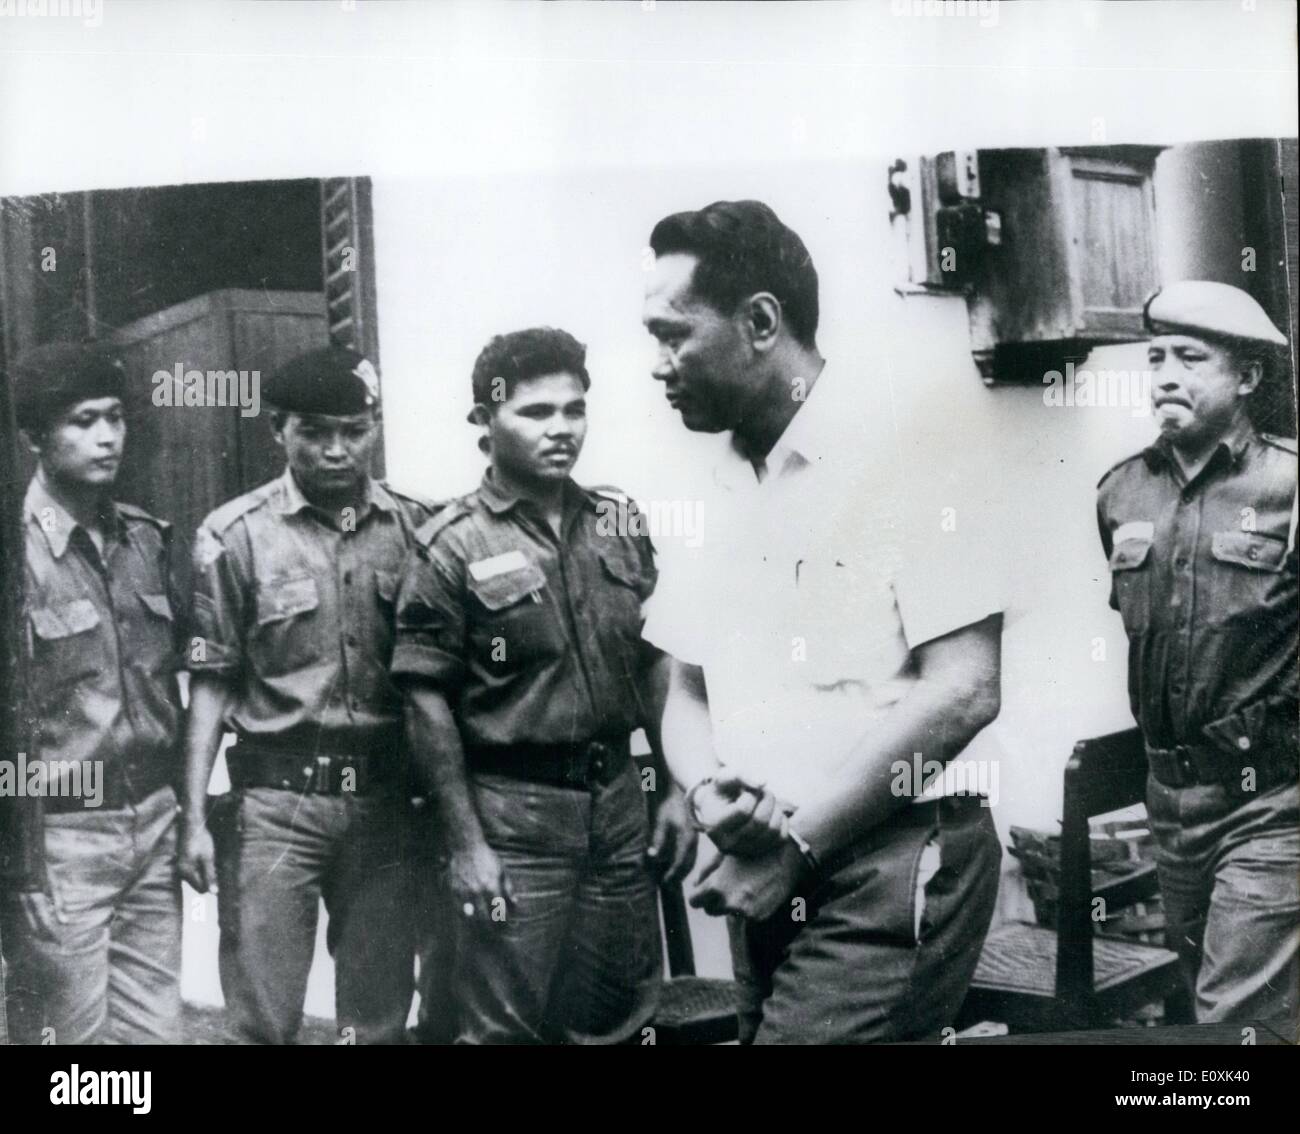 Feb. 02, 1967 - General on trial n Djakarta.: Brigadier - General Supaedjo, 44, is being tried for treason before a military tribunal in Djakarta. The general is said to have been the military brains of the abortive 1965 Indonesian Communist coup aimed to toppling the legal government, and the alleged link between the coup plotters and President Sukarno. Photo shows Brigaier General Supardjo in handcuffs being escorted into the military tribunal building in Djakarta. Stock Photo